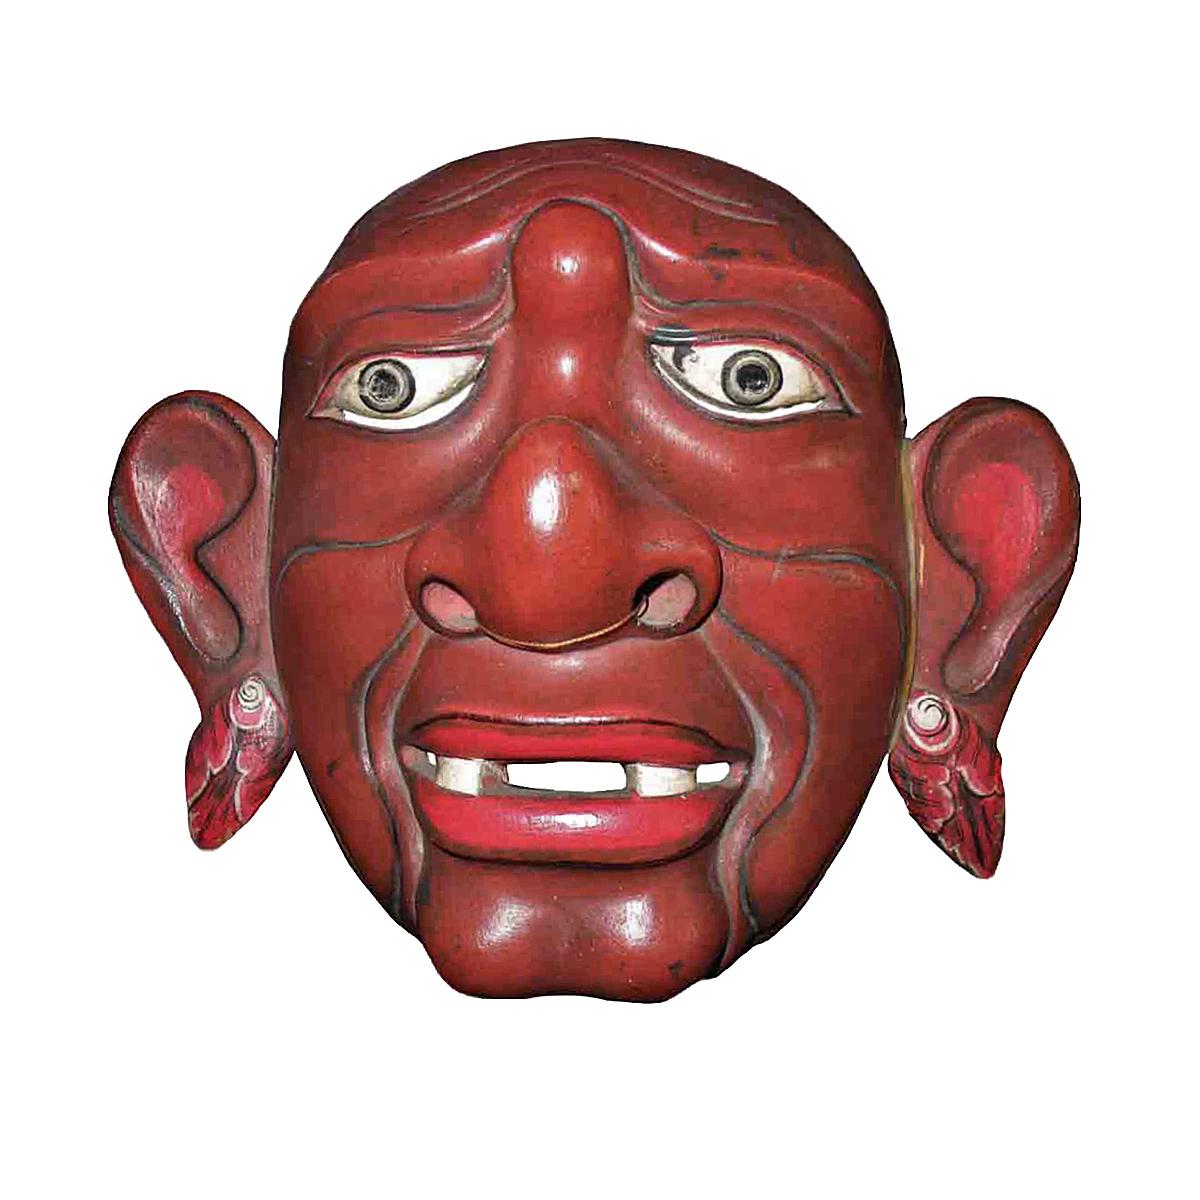 A vintage theater mask from Bali, Indonesia, circa 1975-1980. 
Polychromed hand-carved teak, mounted on a black metal stand.

This type of mask is used at Indonesian Topeng or Mask theater dances, where traditional stories of nobles, kings,